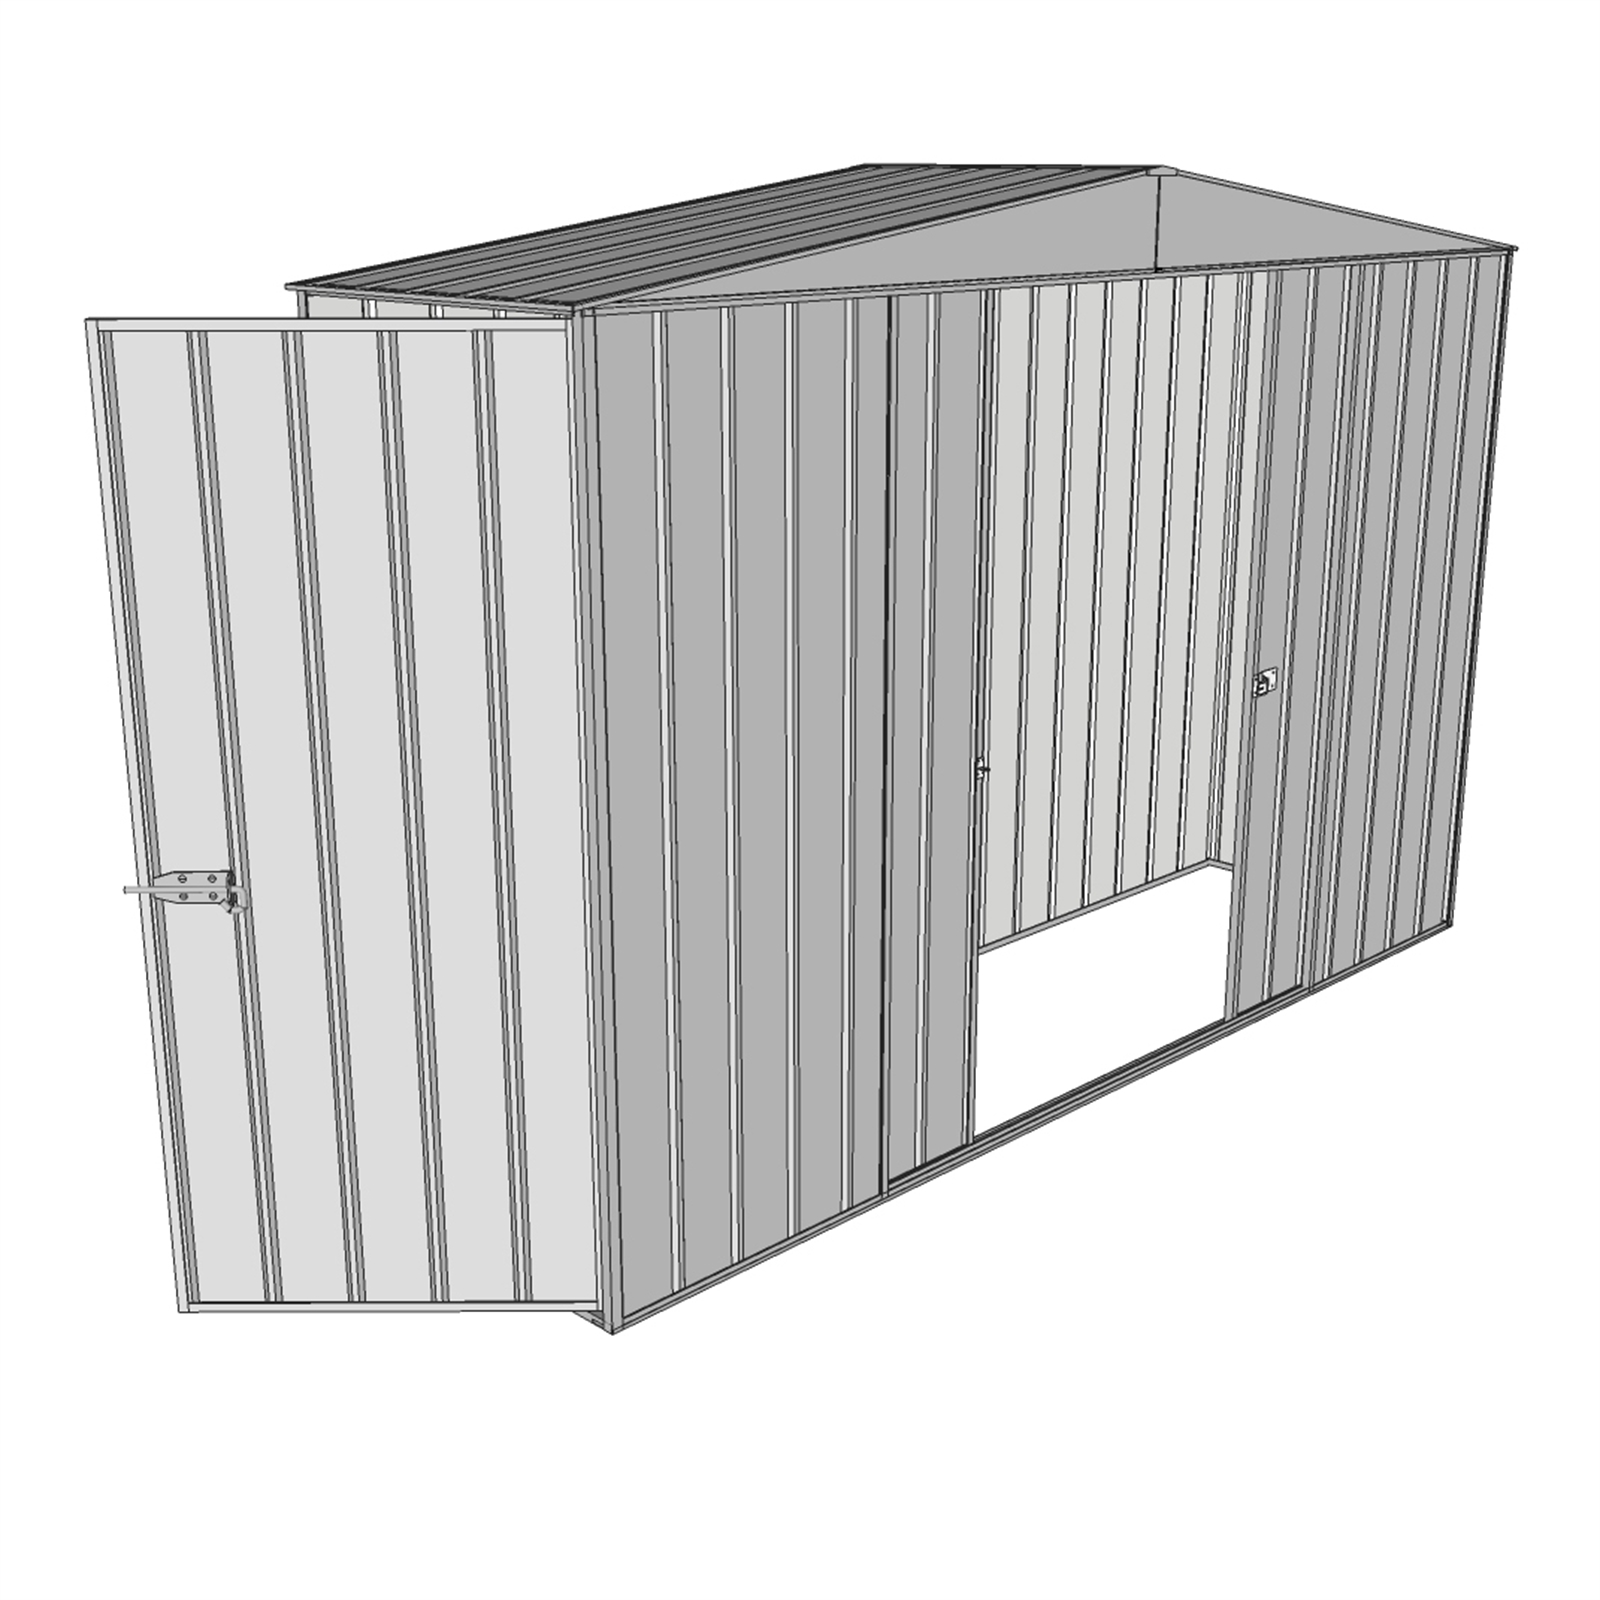 Build-a-Shed 3.0 x 2.3 x 0.8m Zinc Double Sliding and Single Hinge Door Narrow Shed